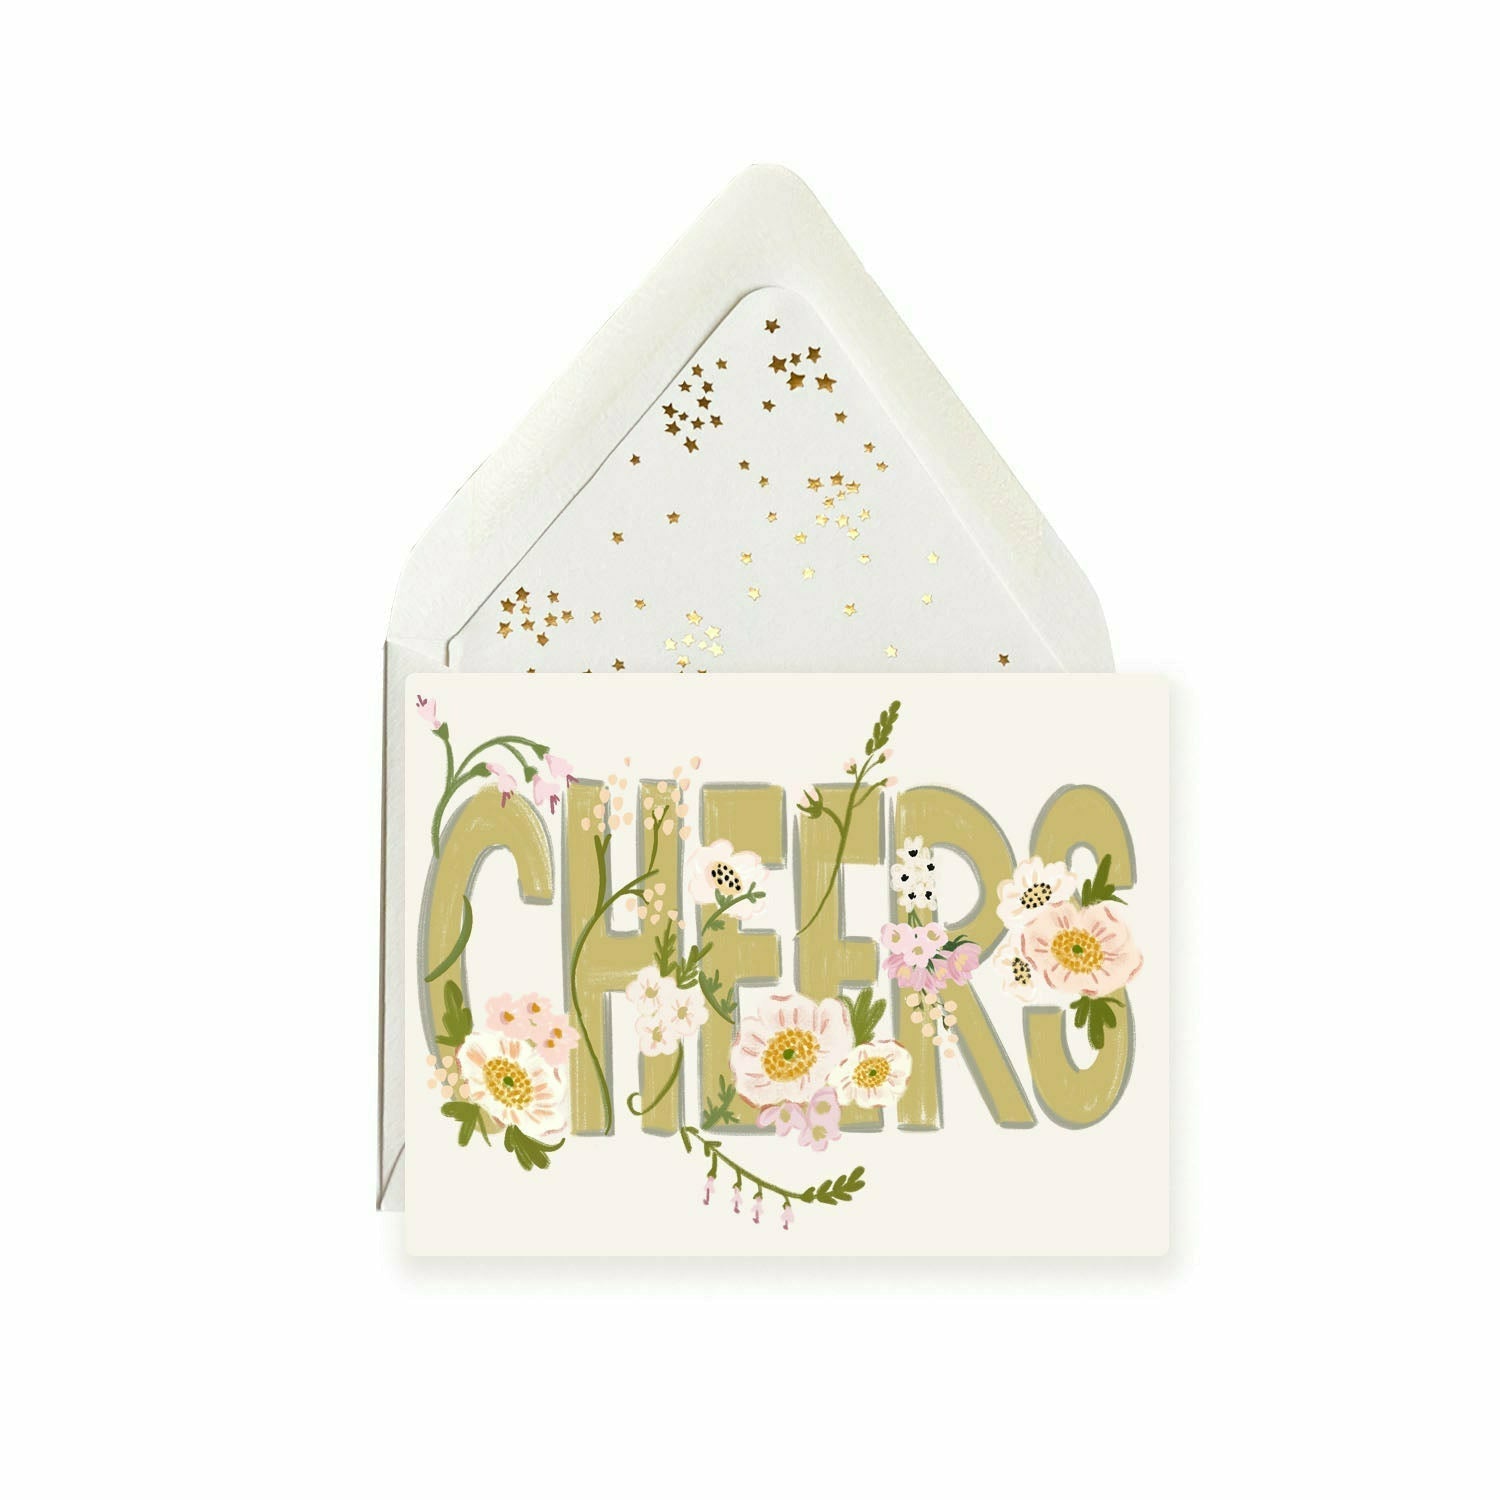 Cheers Floral Card - The First Snow